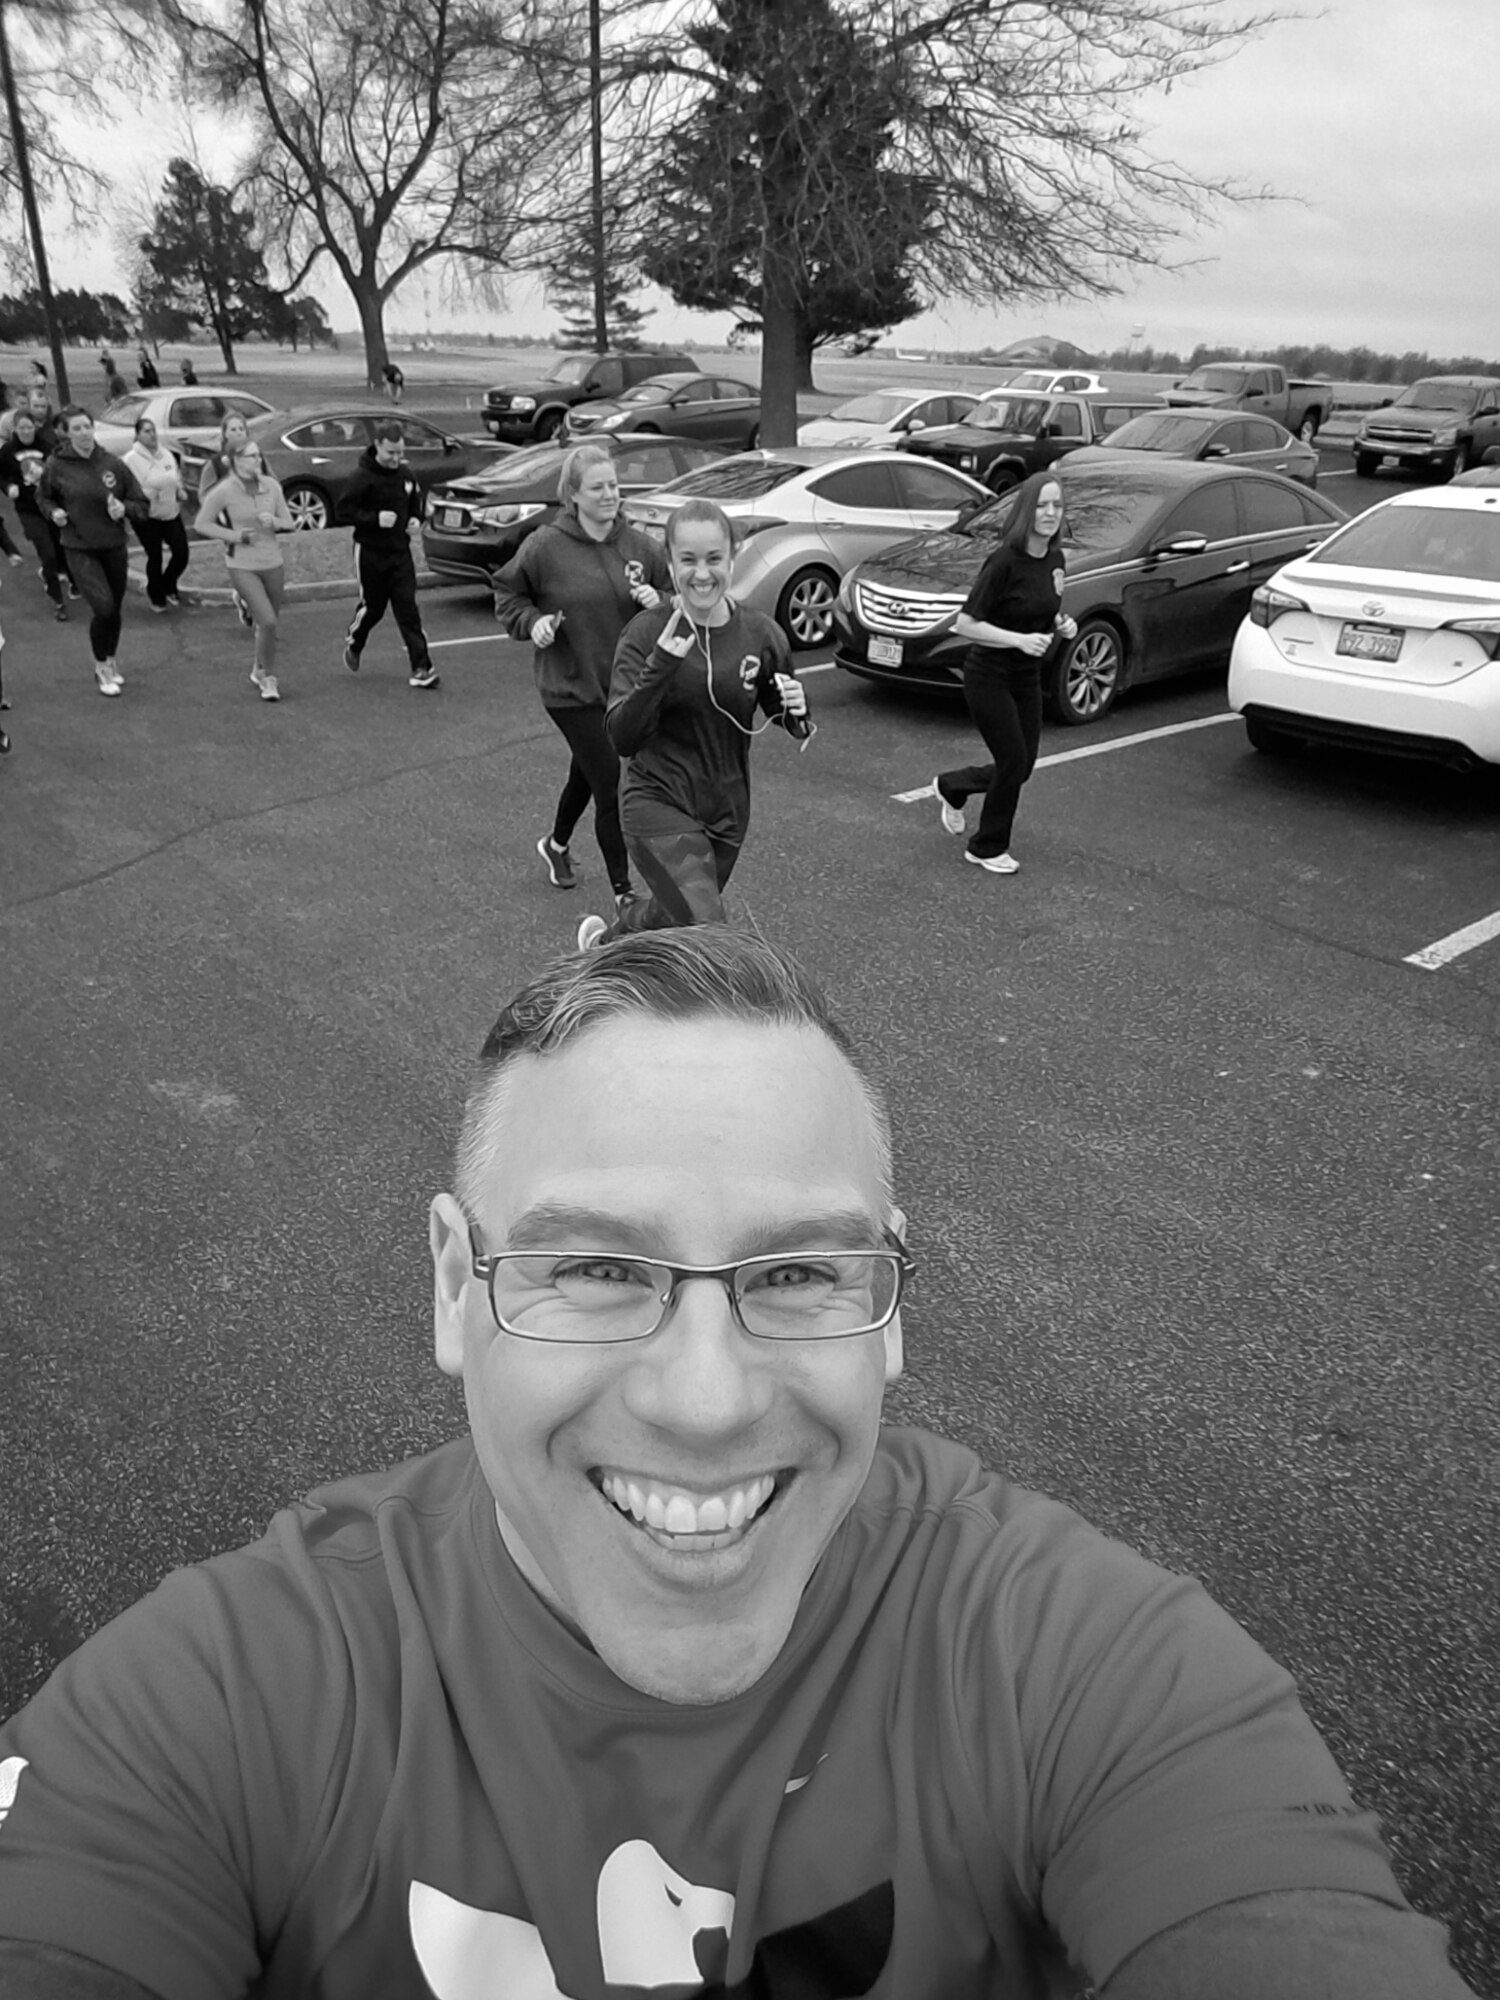 Christopher Parr, 932nd Airlift Wing Public Affairs specialist snaps a quick photo, during the warm up laps, before starting the Monday workout for the running clinic, Feb. 6, 2017, Scott Air Force Base, Illinois.  You can follow along with Parr's adventures in running by checking out his weekly blog in the commentaries section.  (U.S. Air Force photo by Christopher Parr)